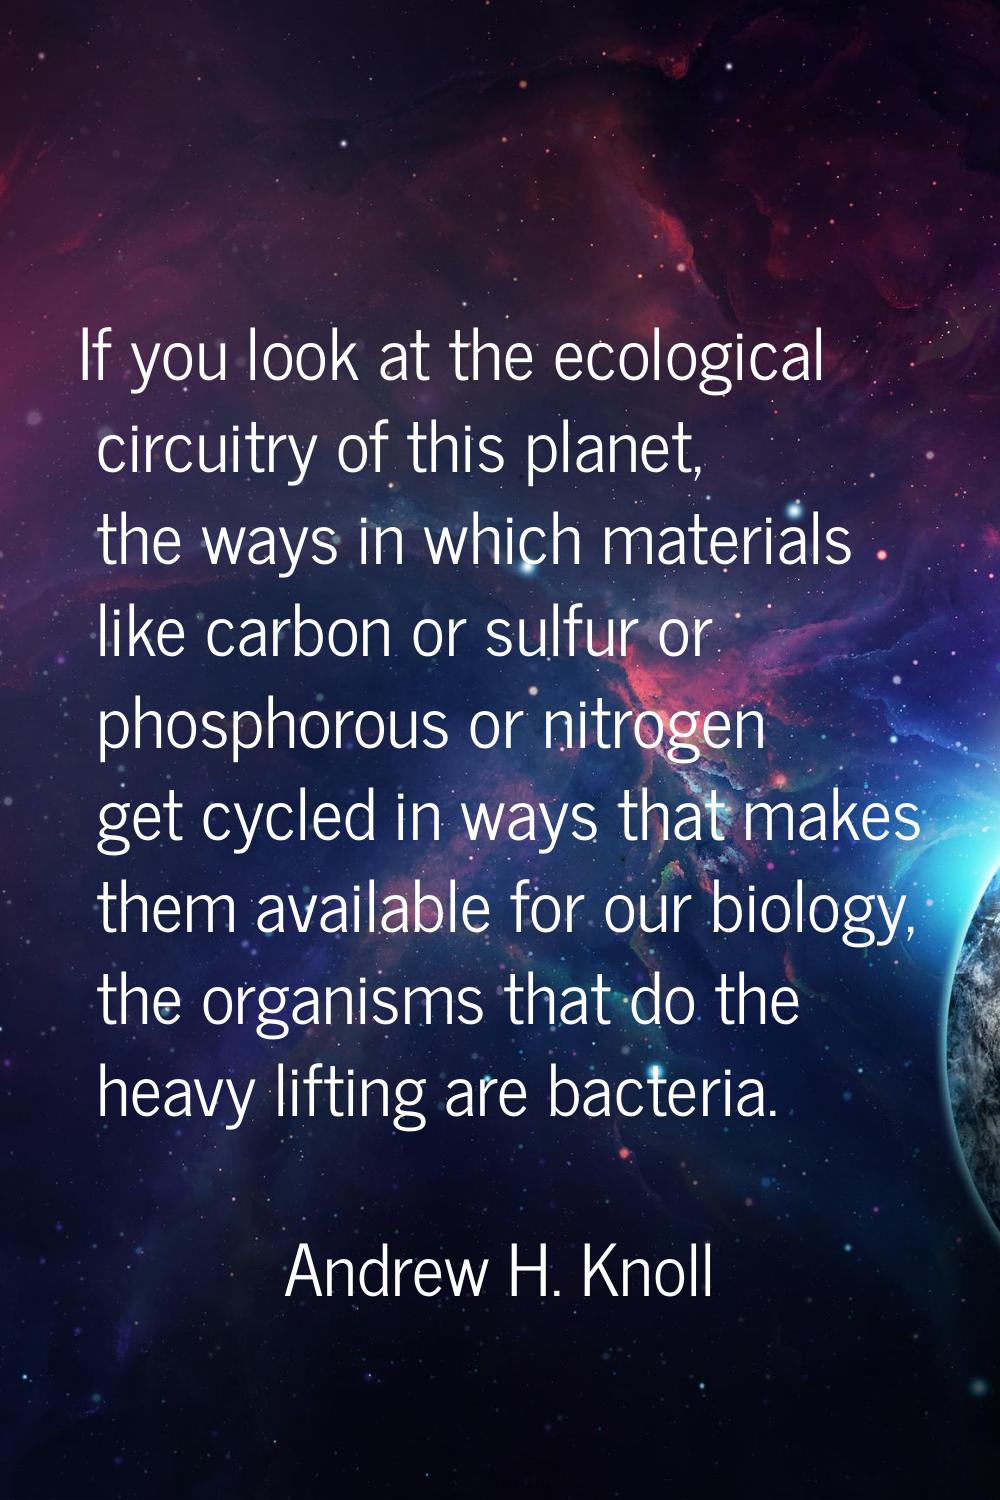 If you look at the ecological circuitry of this planet, the ways in which materials like carbon or 